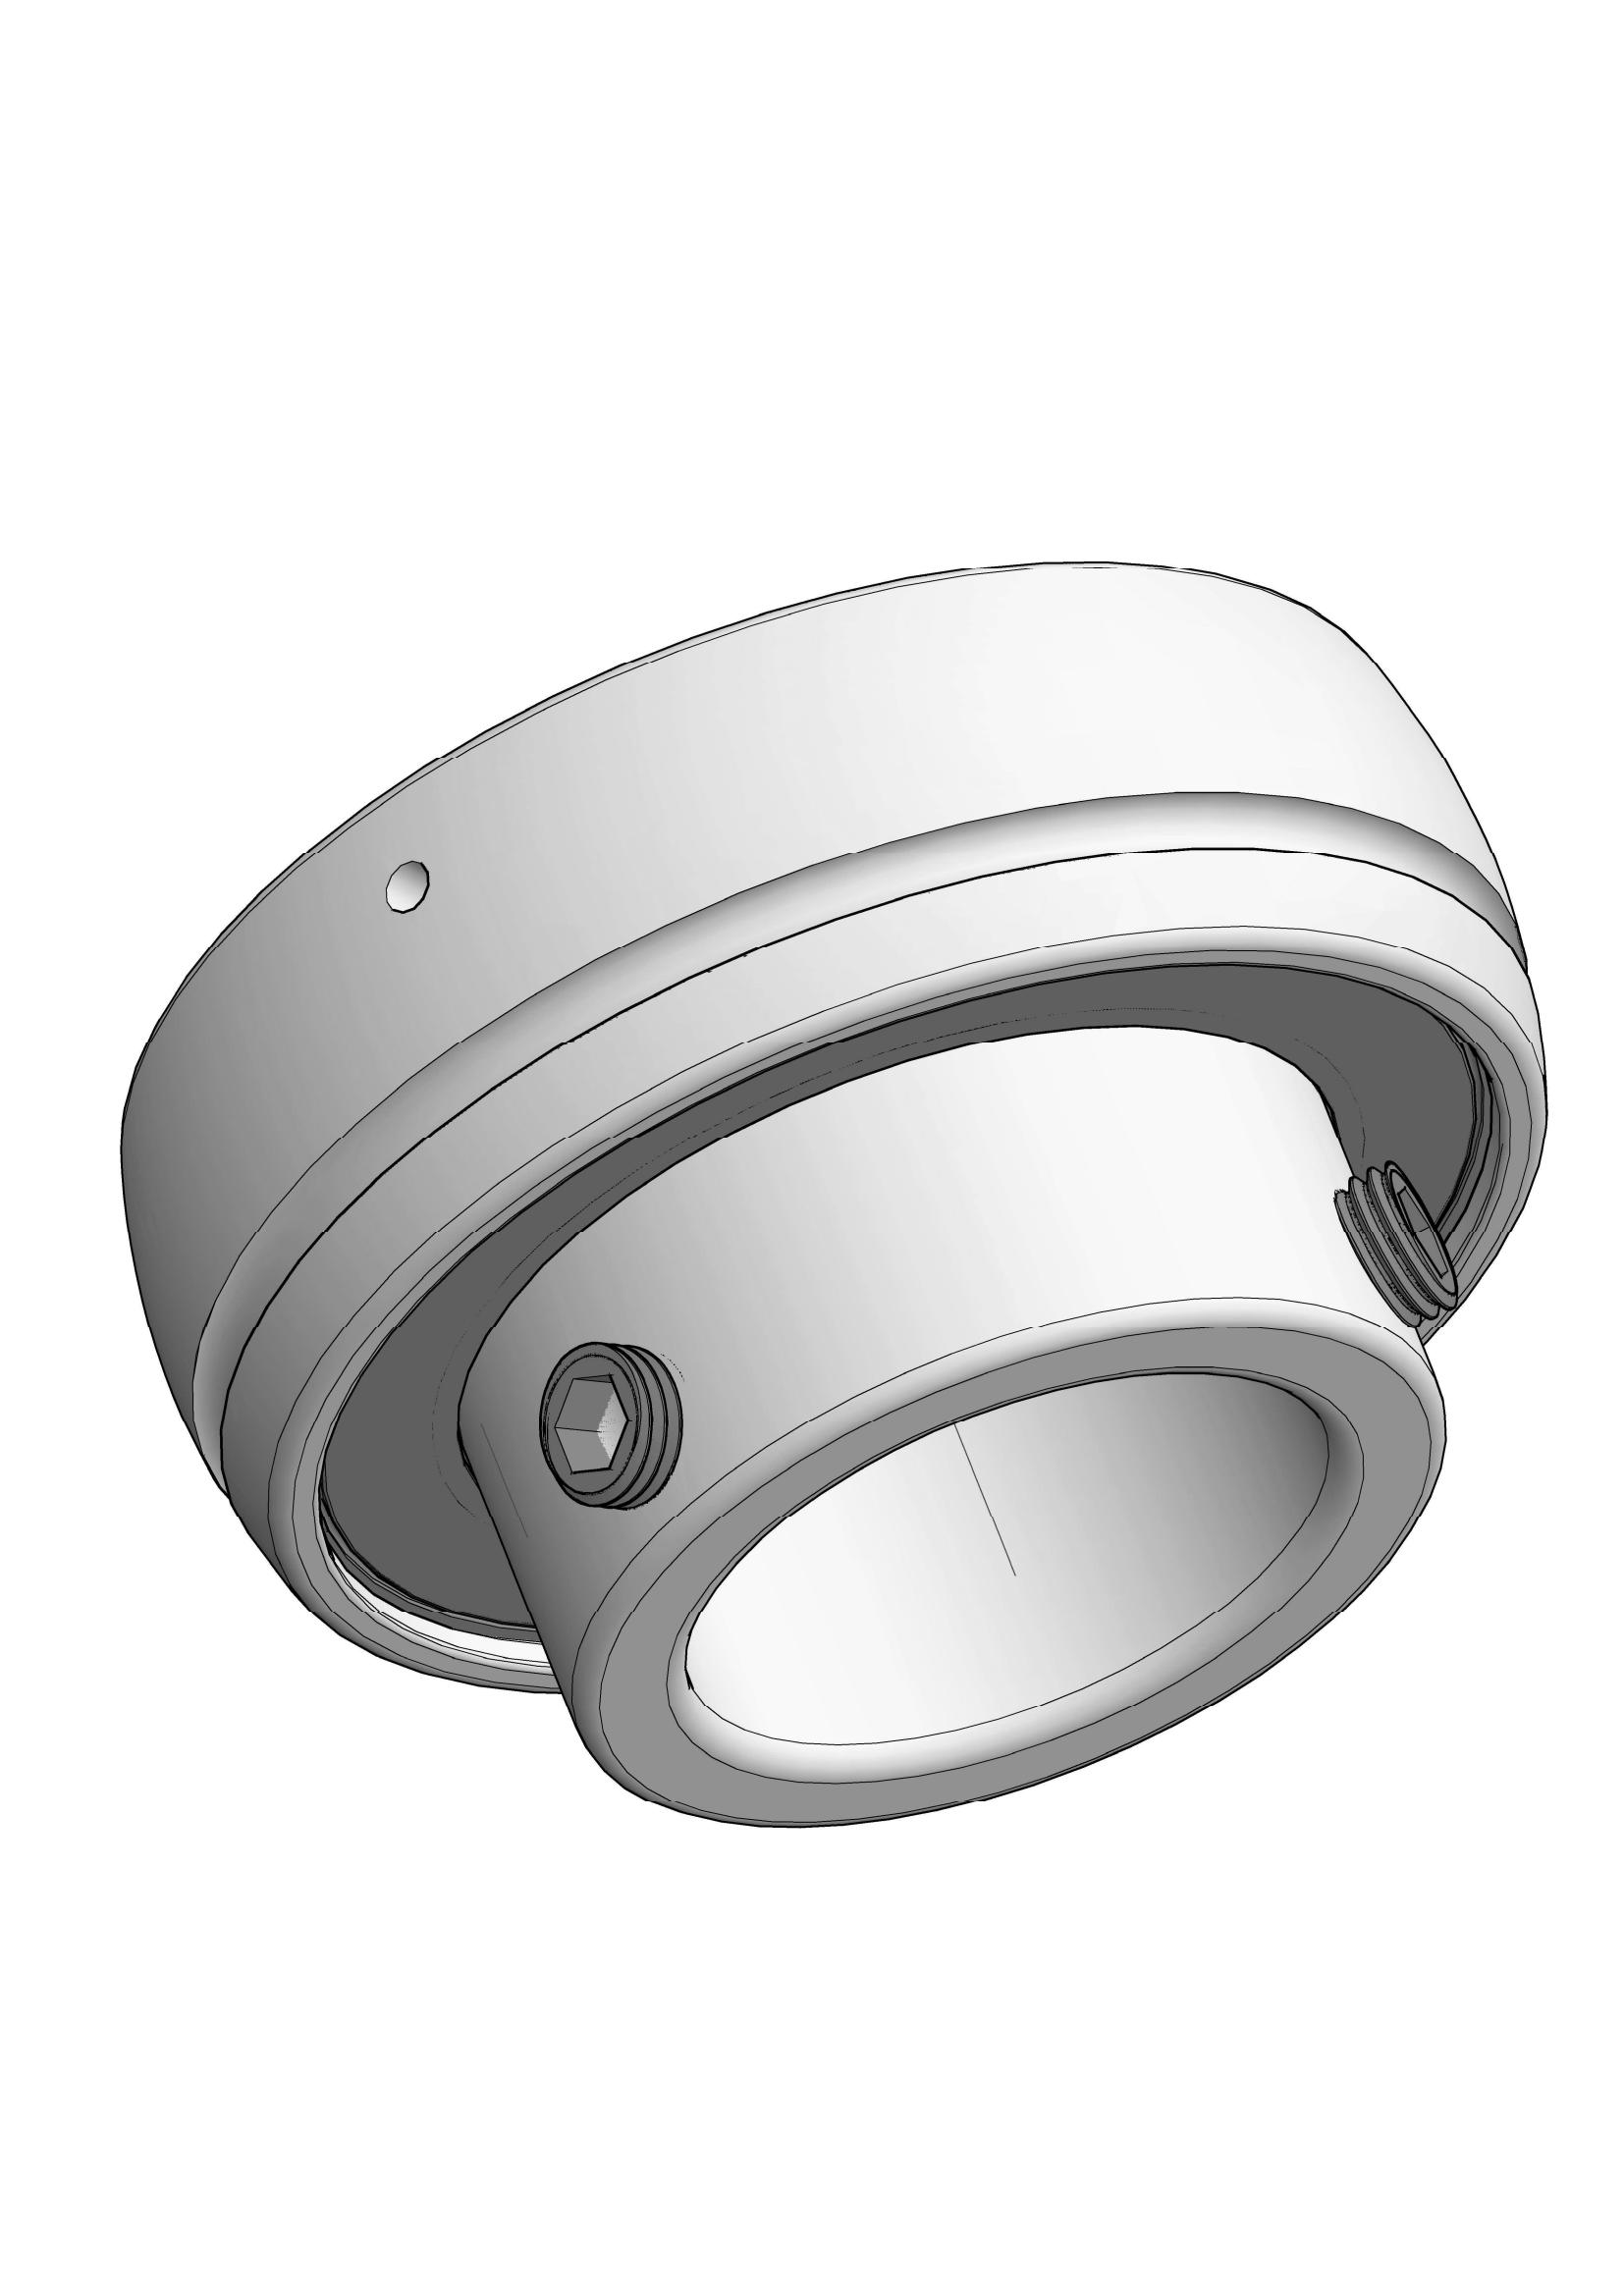 SB212-39 insert ball bearings with Eccentric Collar Lock with 2-7/16 inch Bore